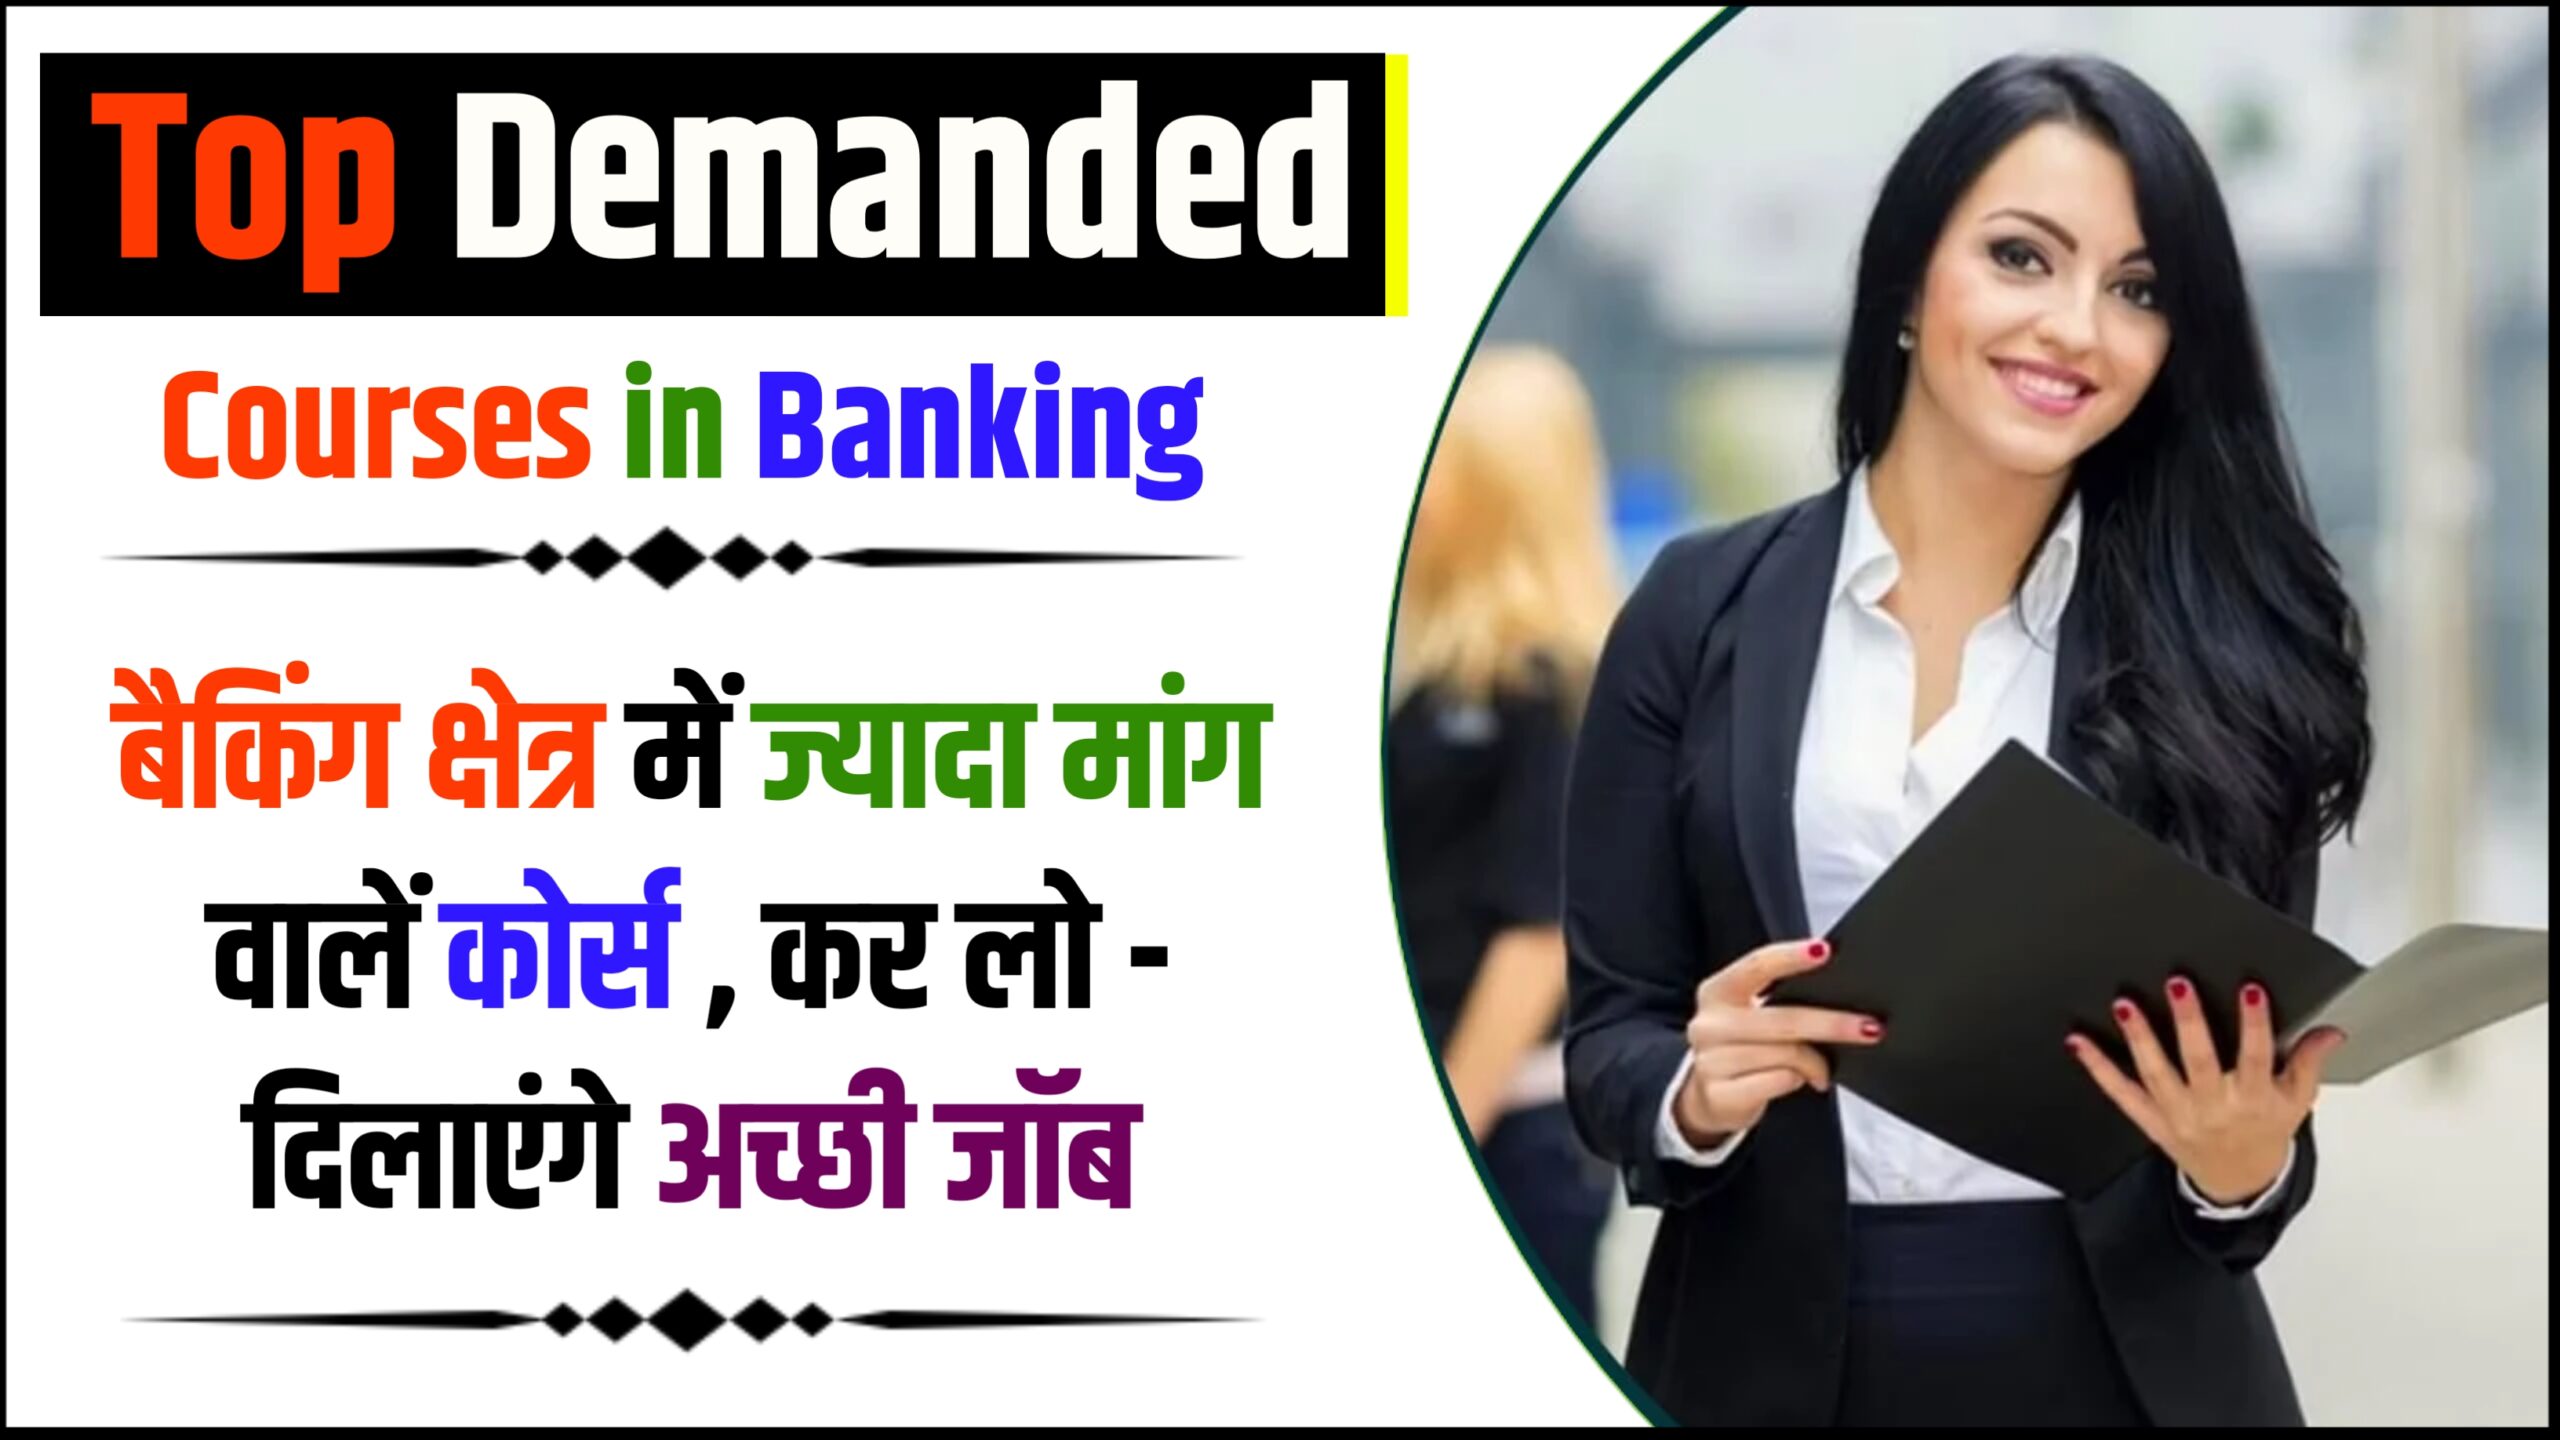 Top Demanded Courses in Banking